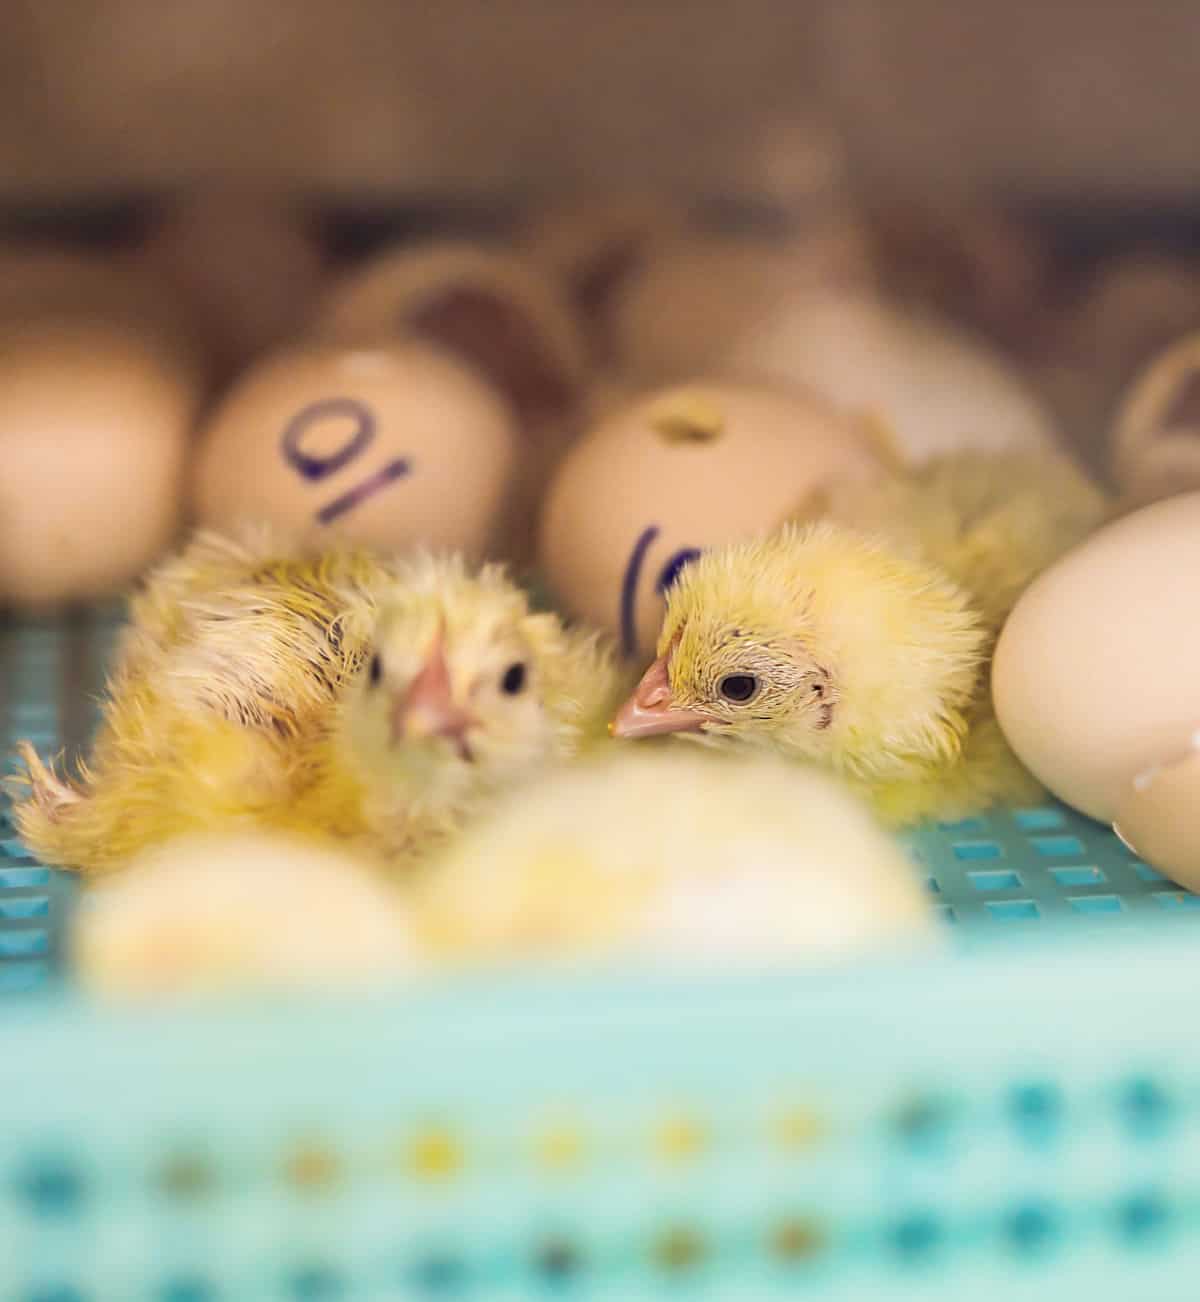 close up of two newly hatched chicks in an incubator